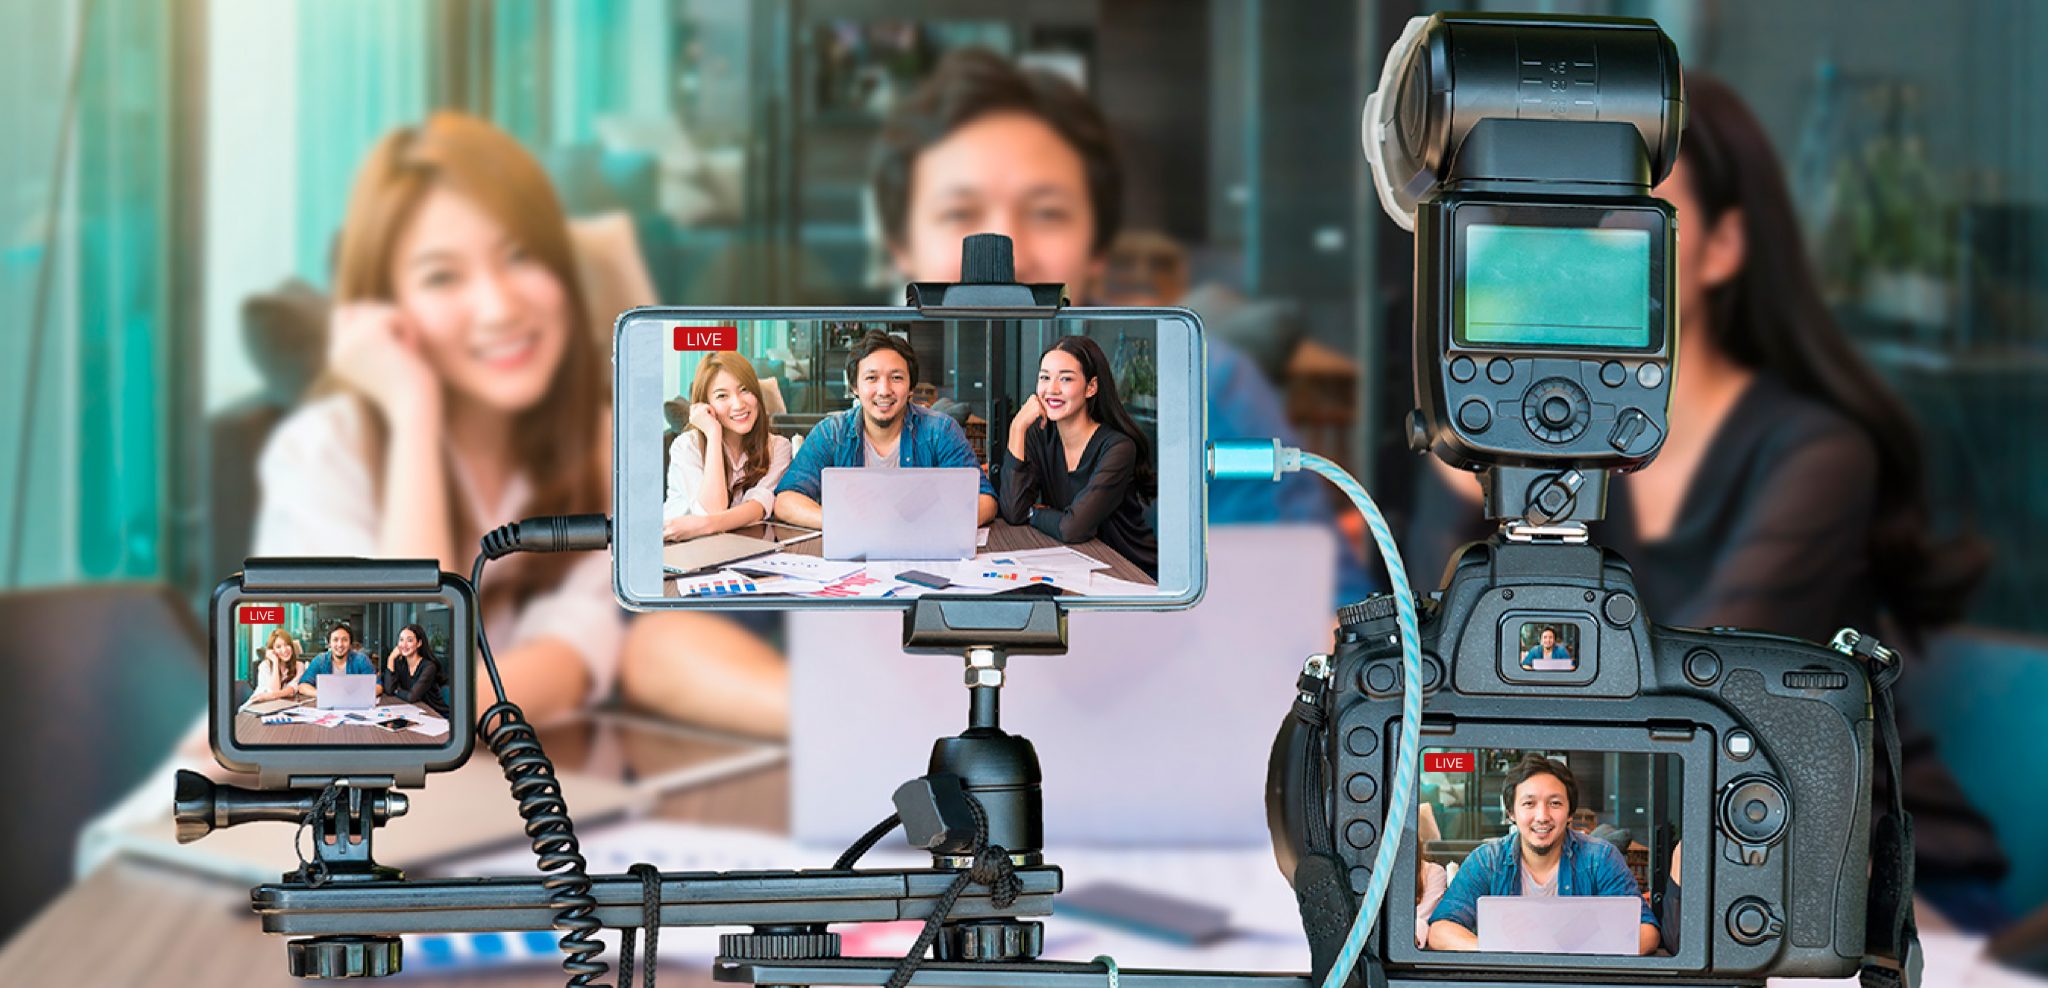 Live Stream Equipment Checklist: Tools You Need to Broadcast Live Video